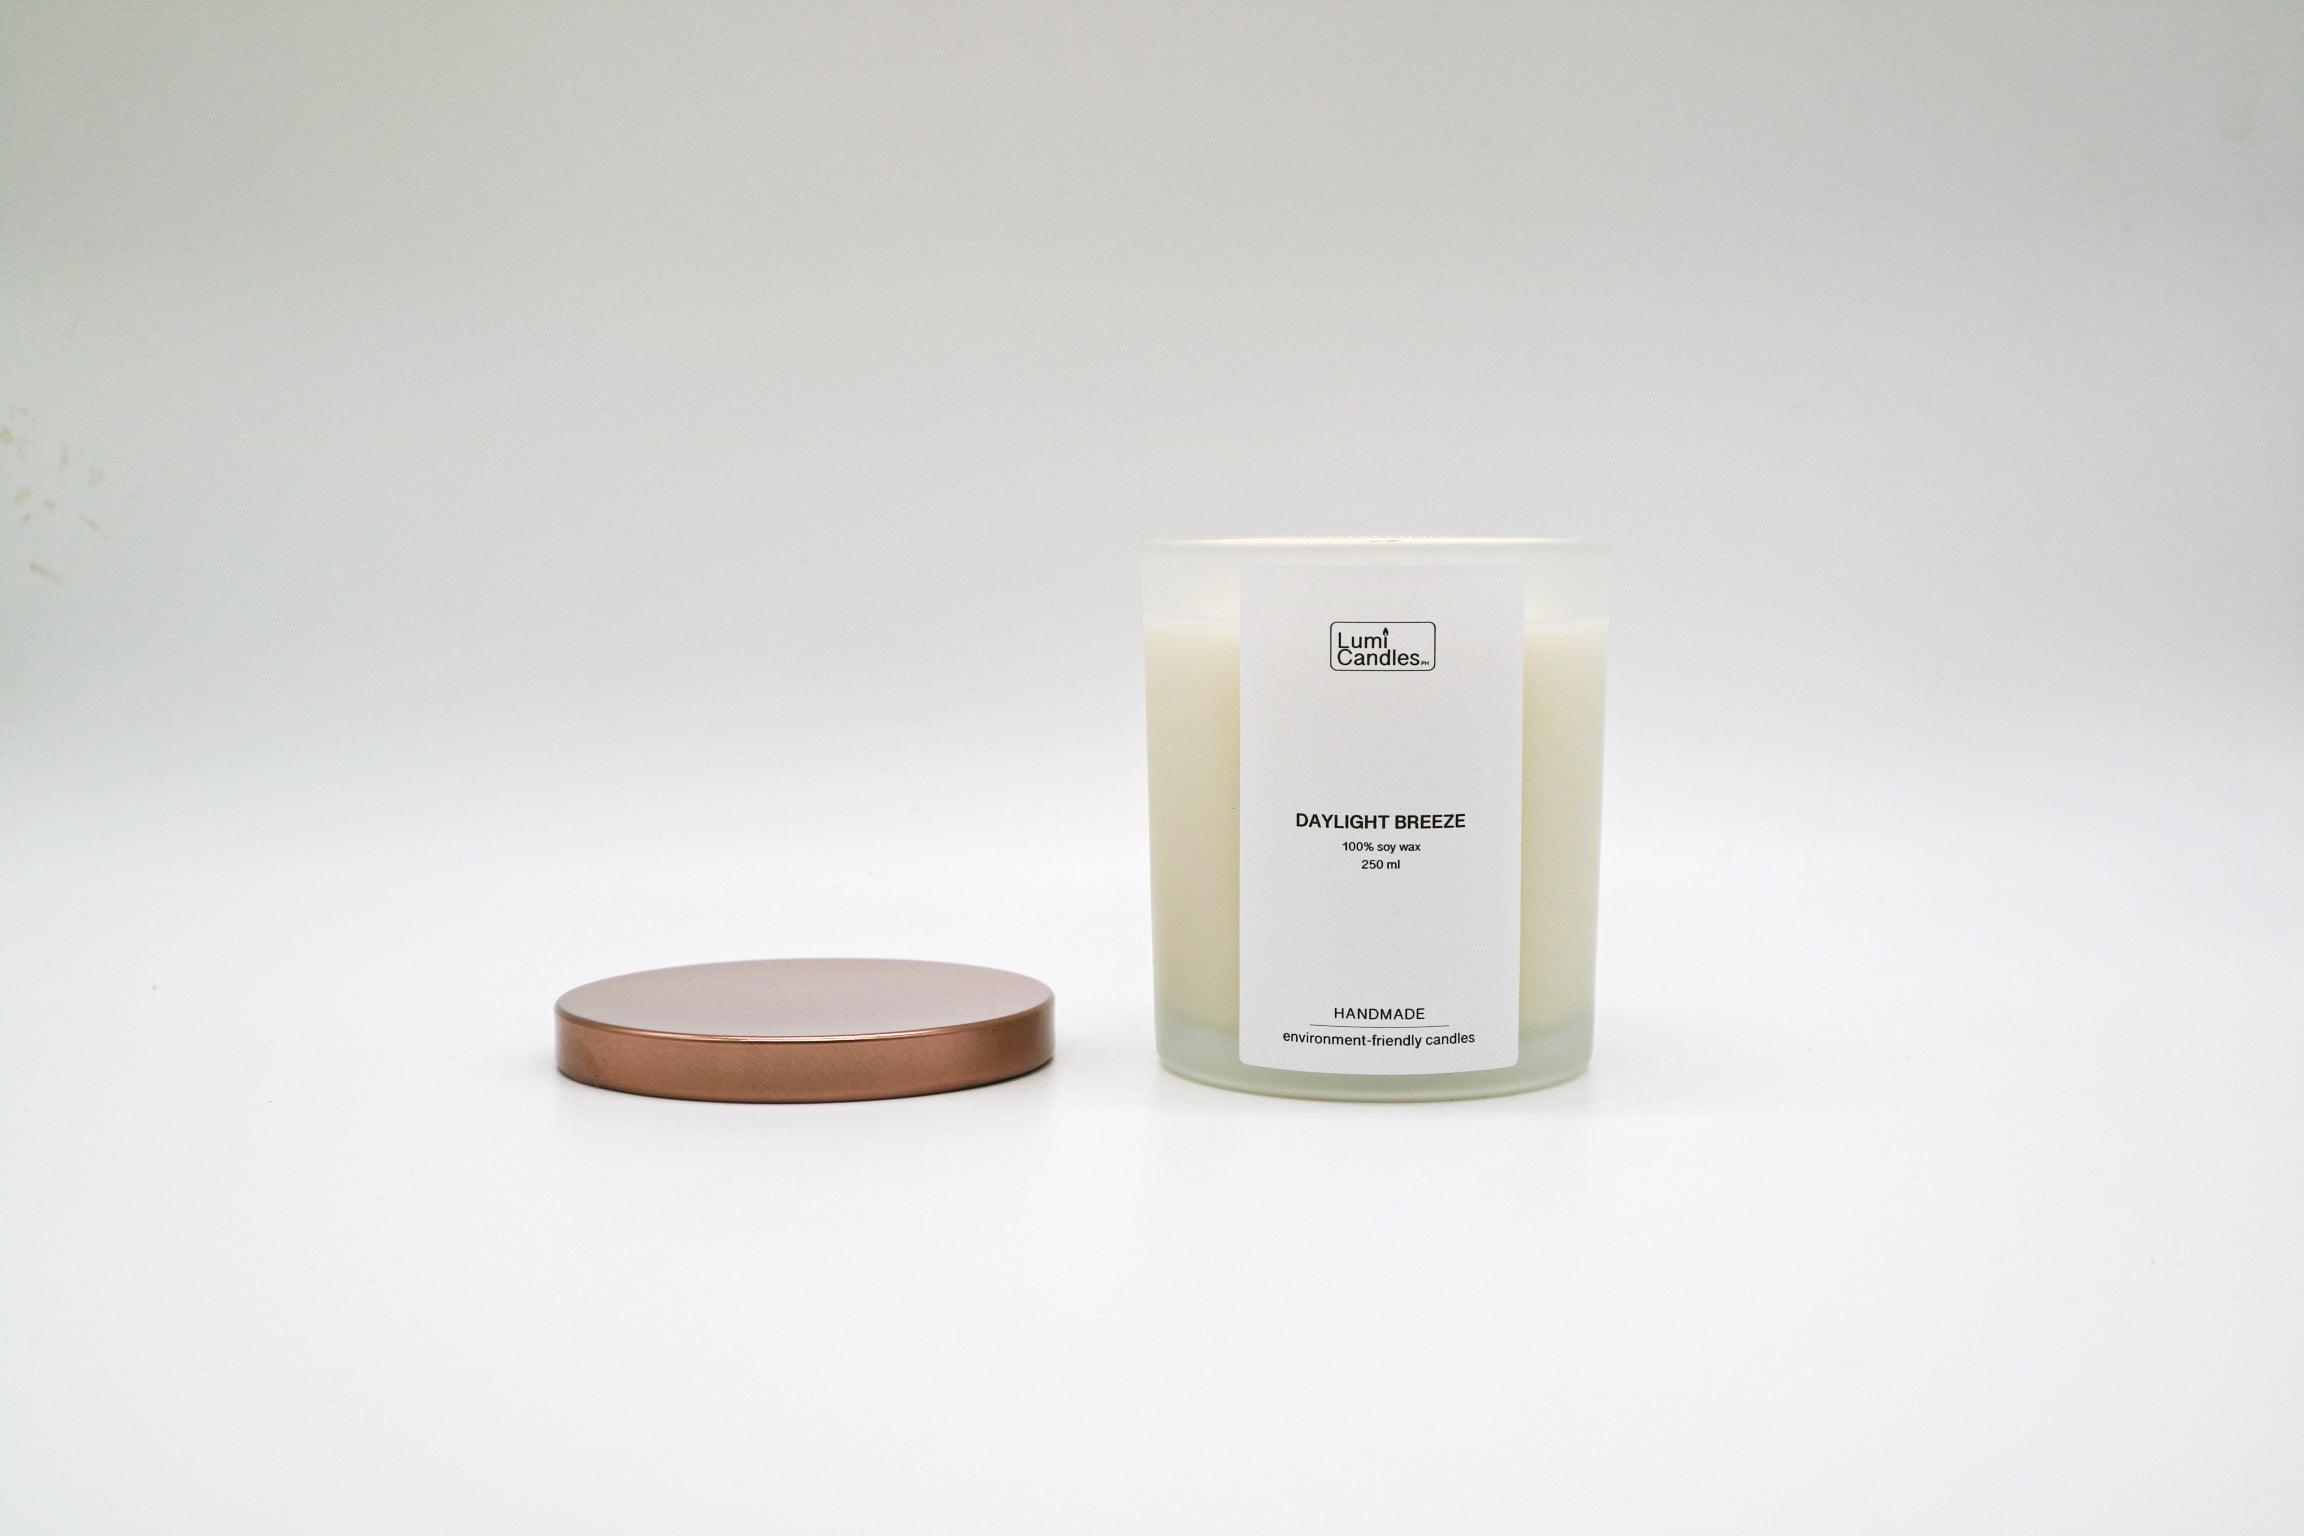 Daylight Breeze LUMI scented soy candle at 250 ML by LUMI Candles PH